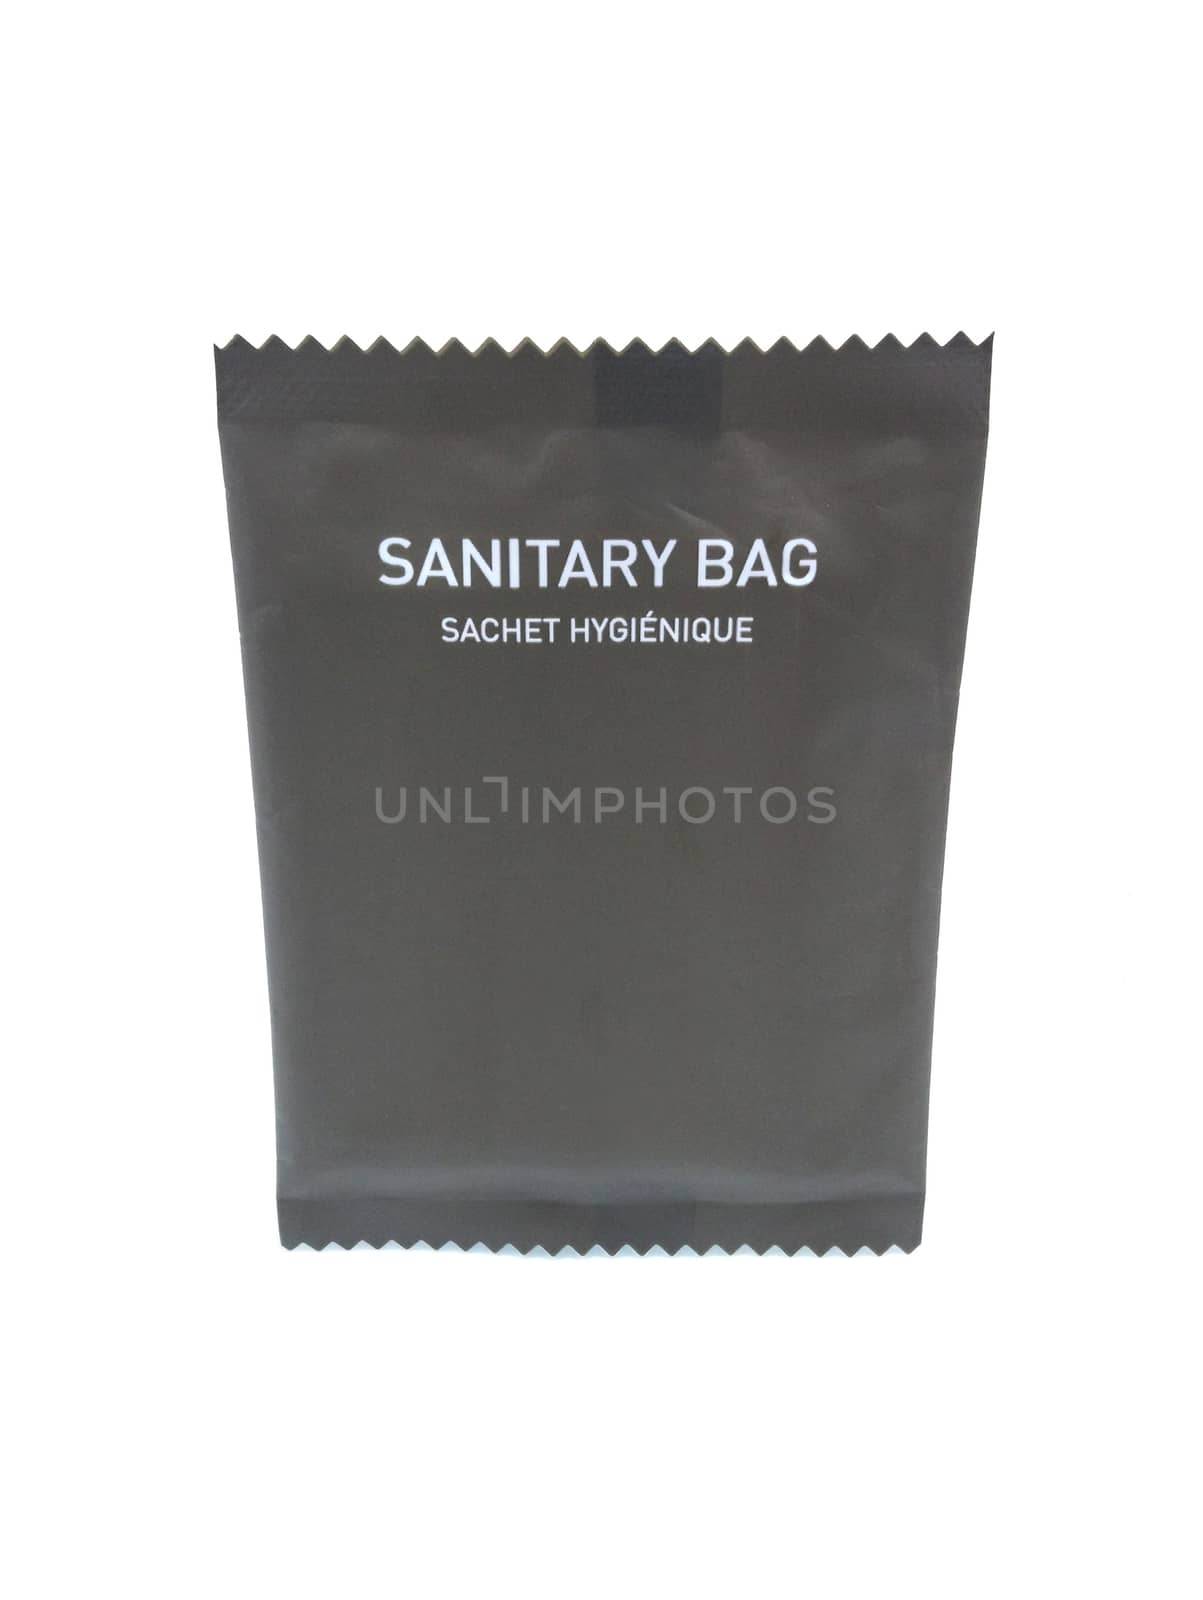 Sanitary bag small pack hotel complimentary  by imwaltersy